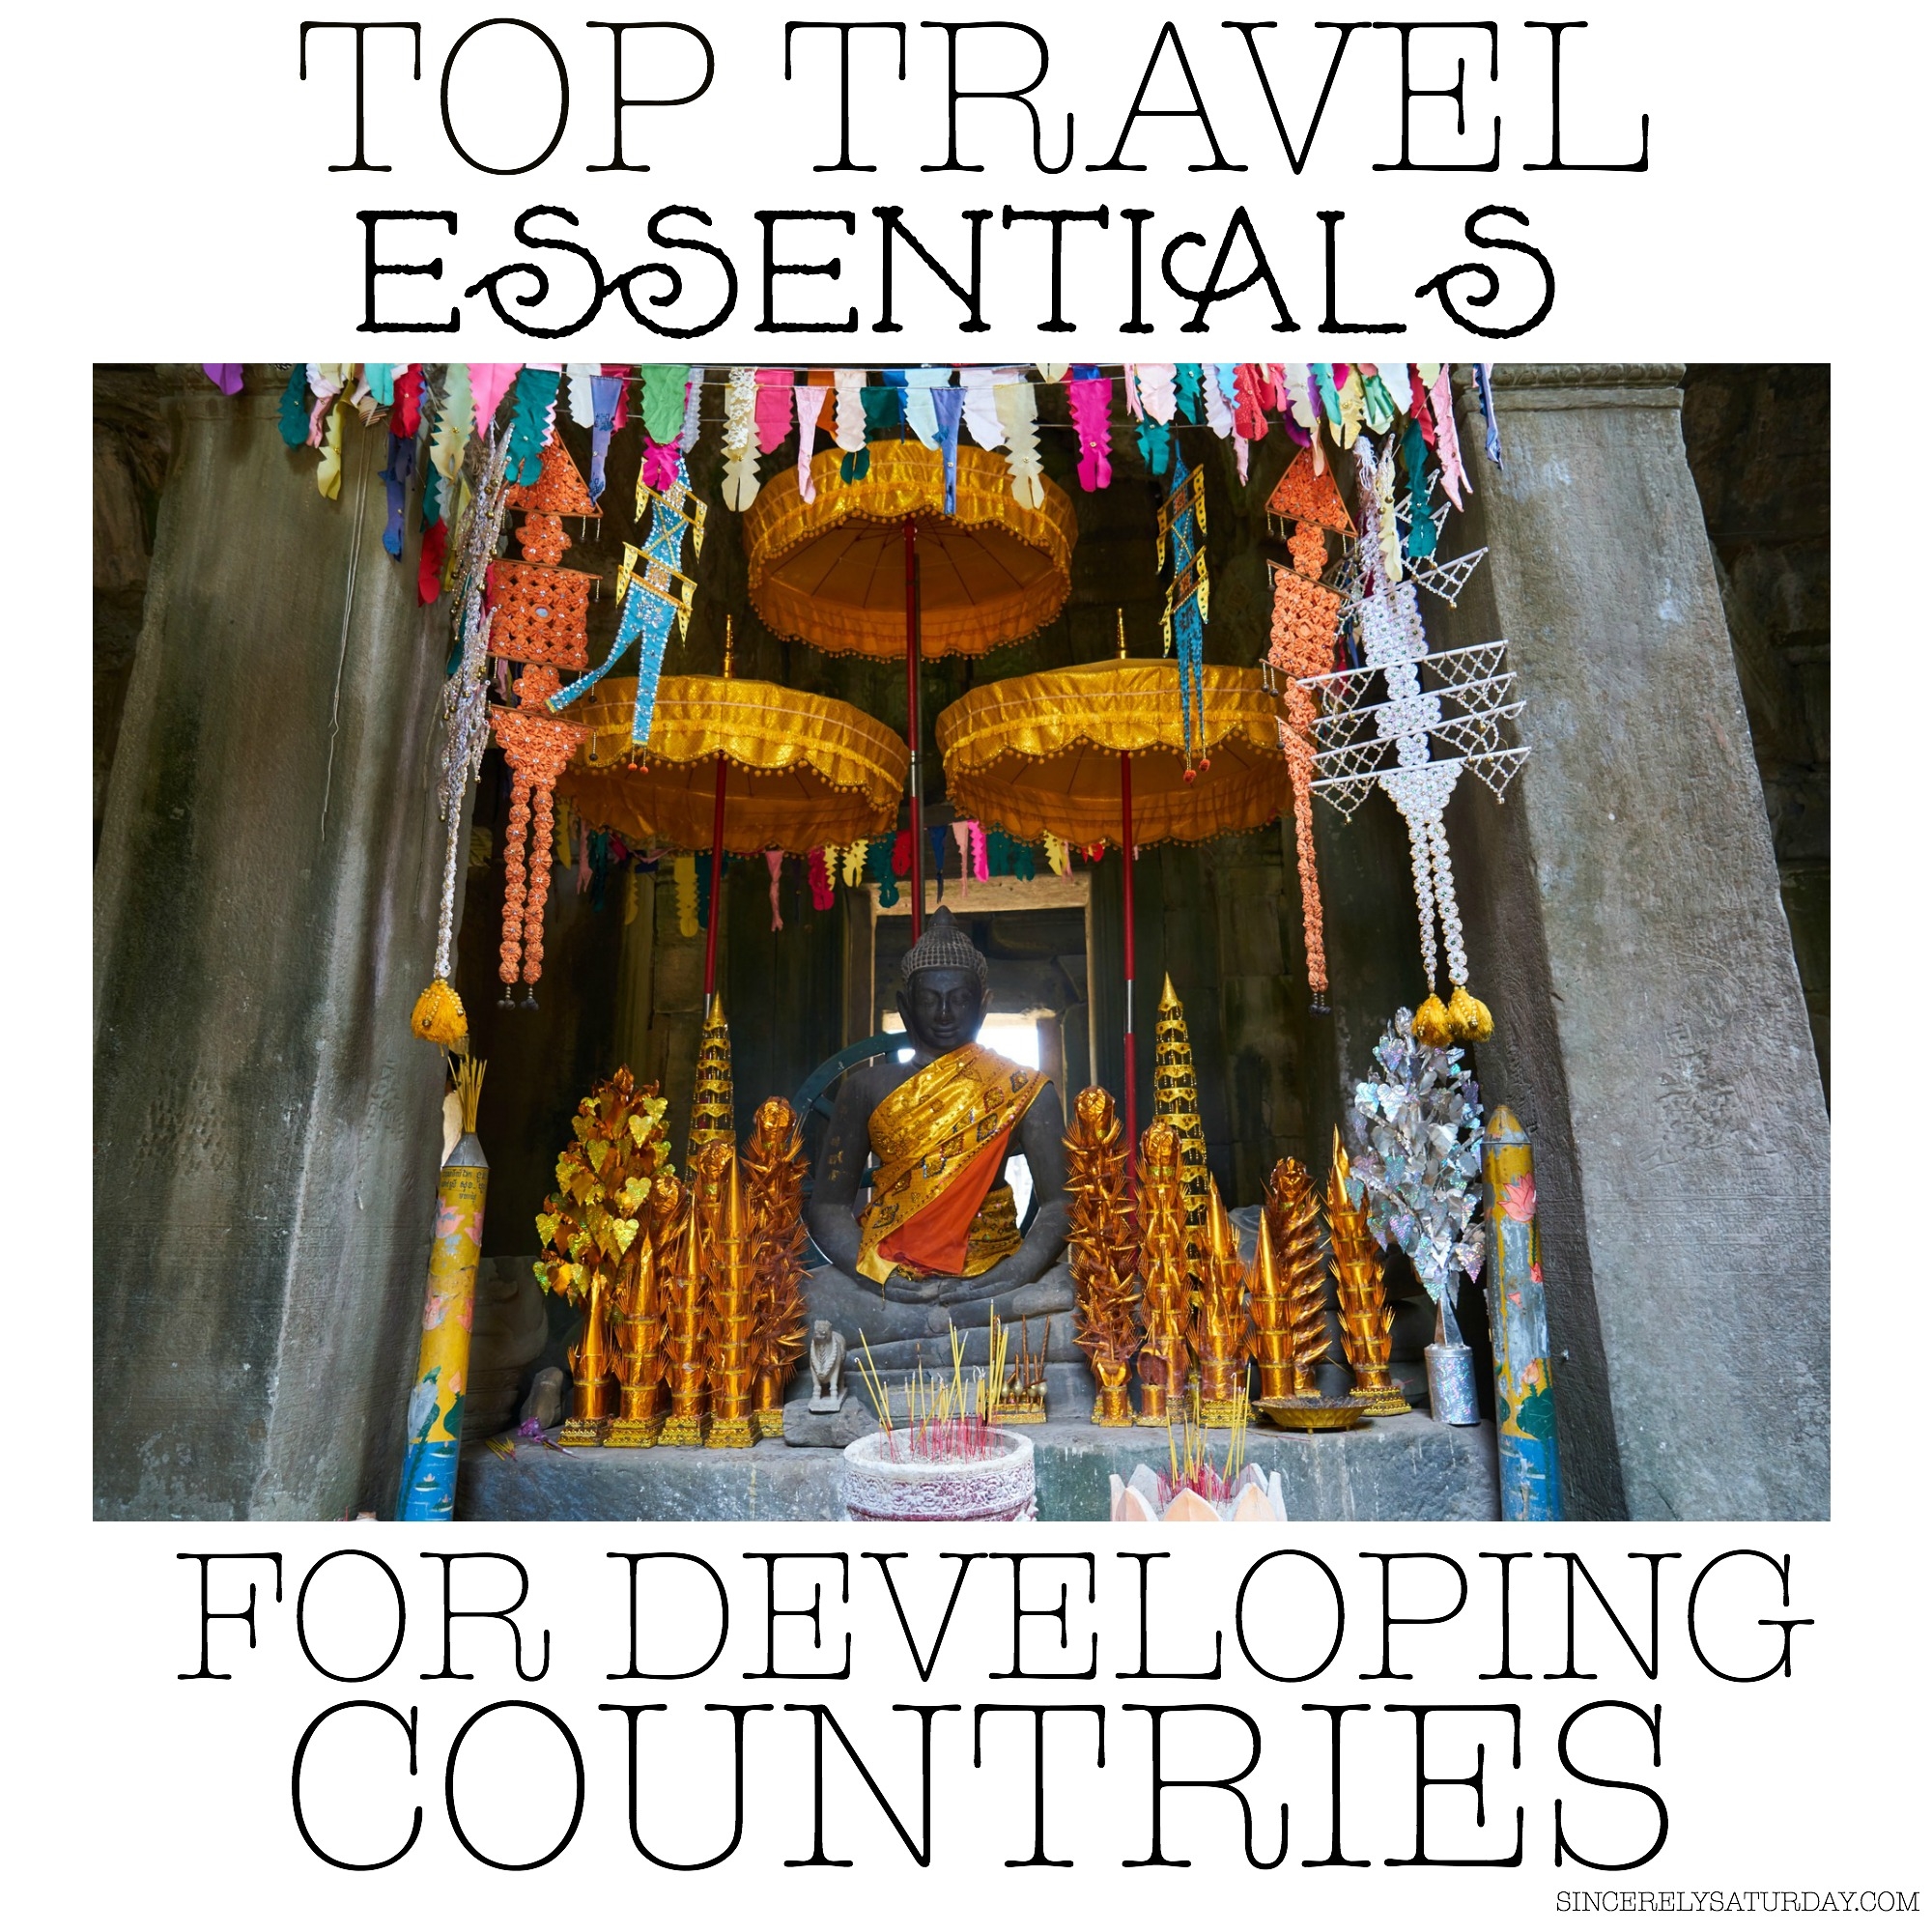 TOP TRAVEL ESSENTIALS FOR DEVELOPING COUNTRIES